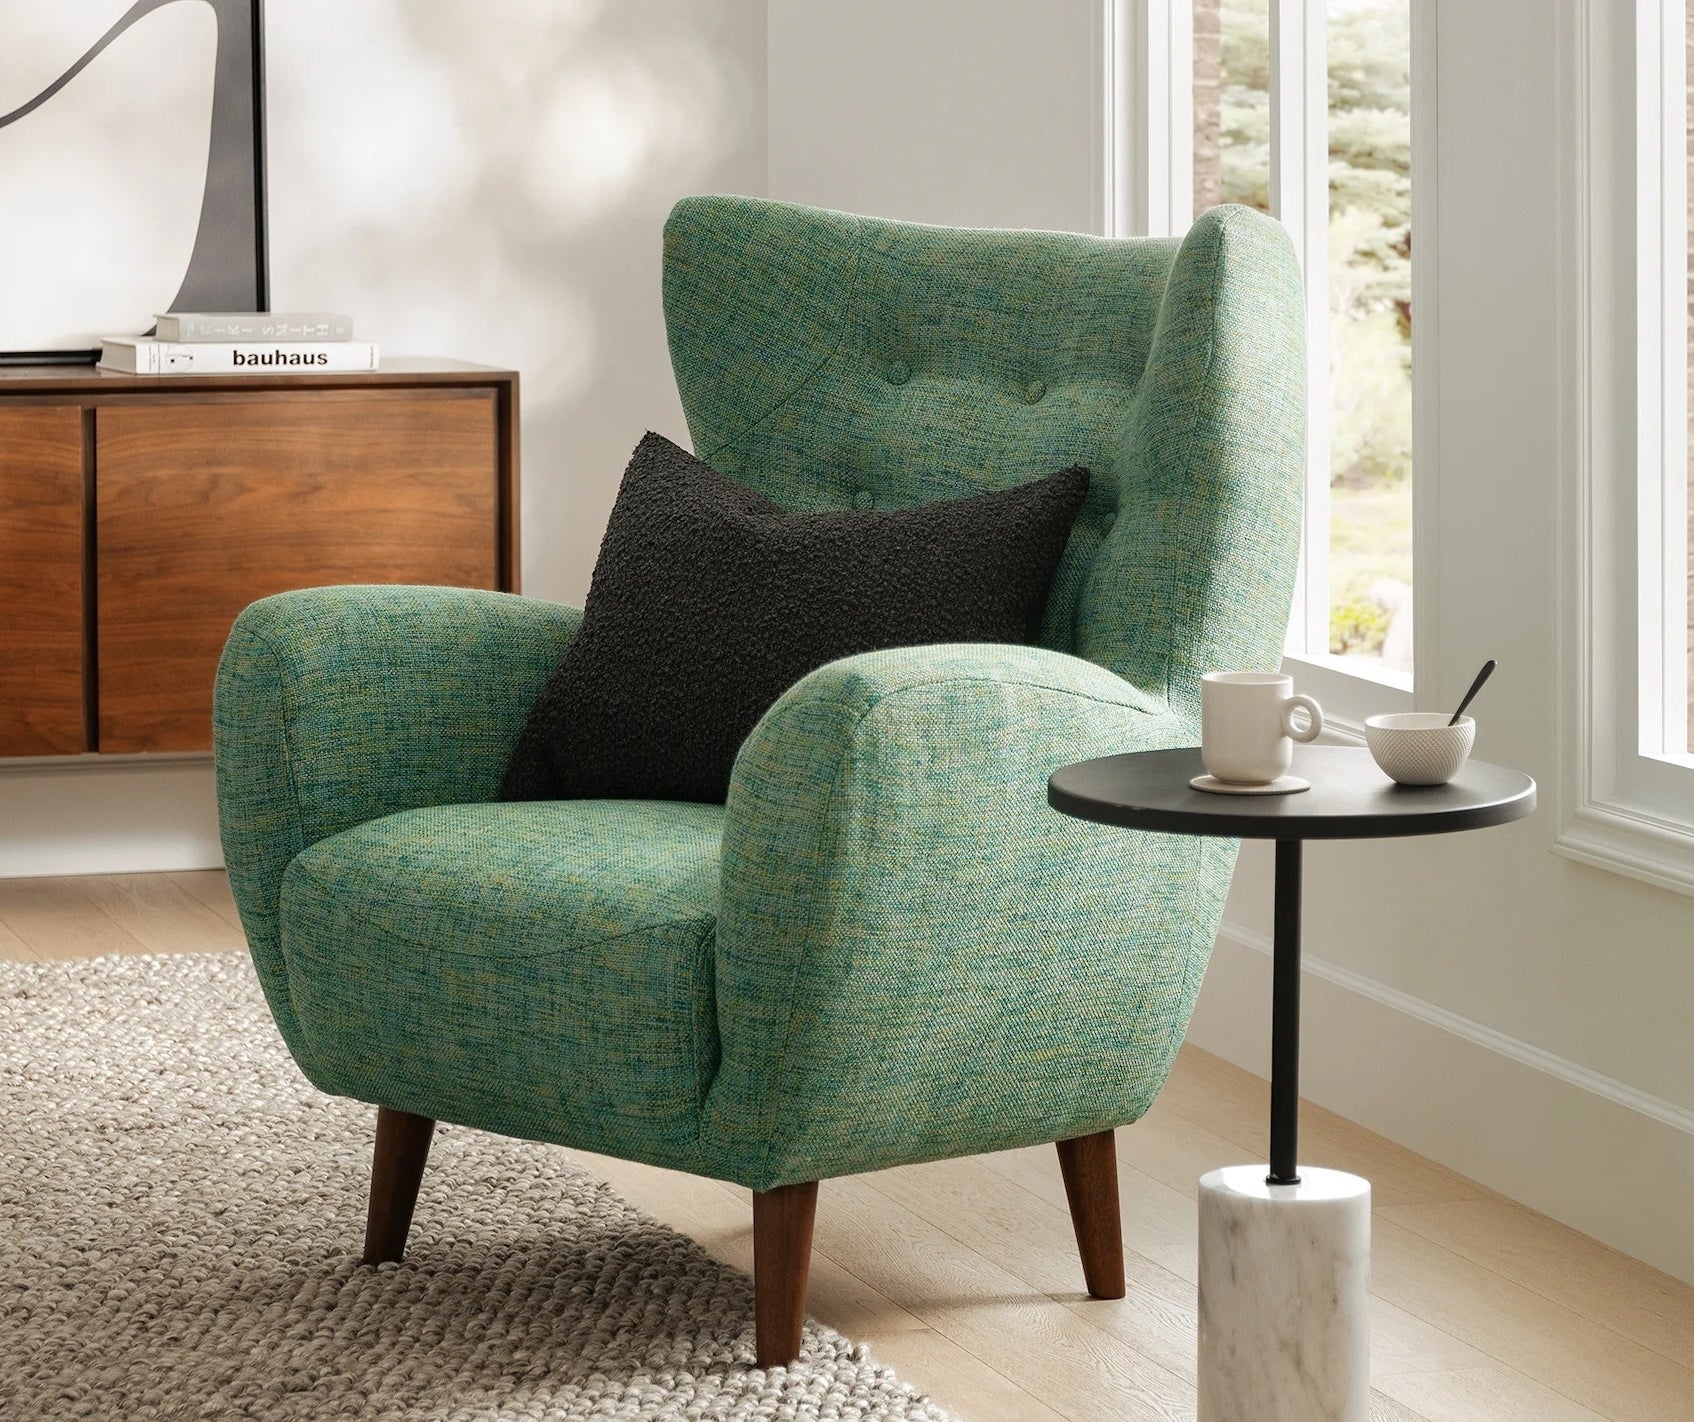 Textured armchair with a side table displaying a tea set in a well-lit, cozy room setup